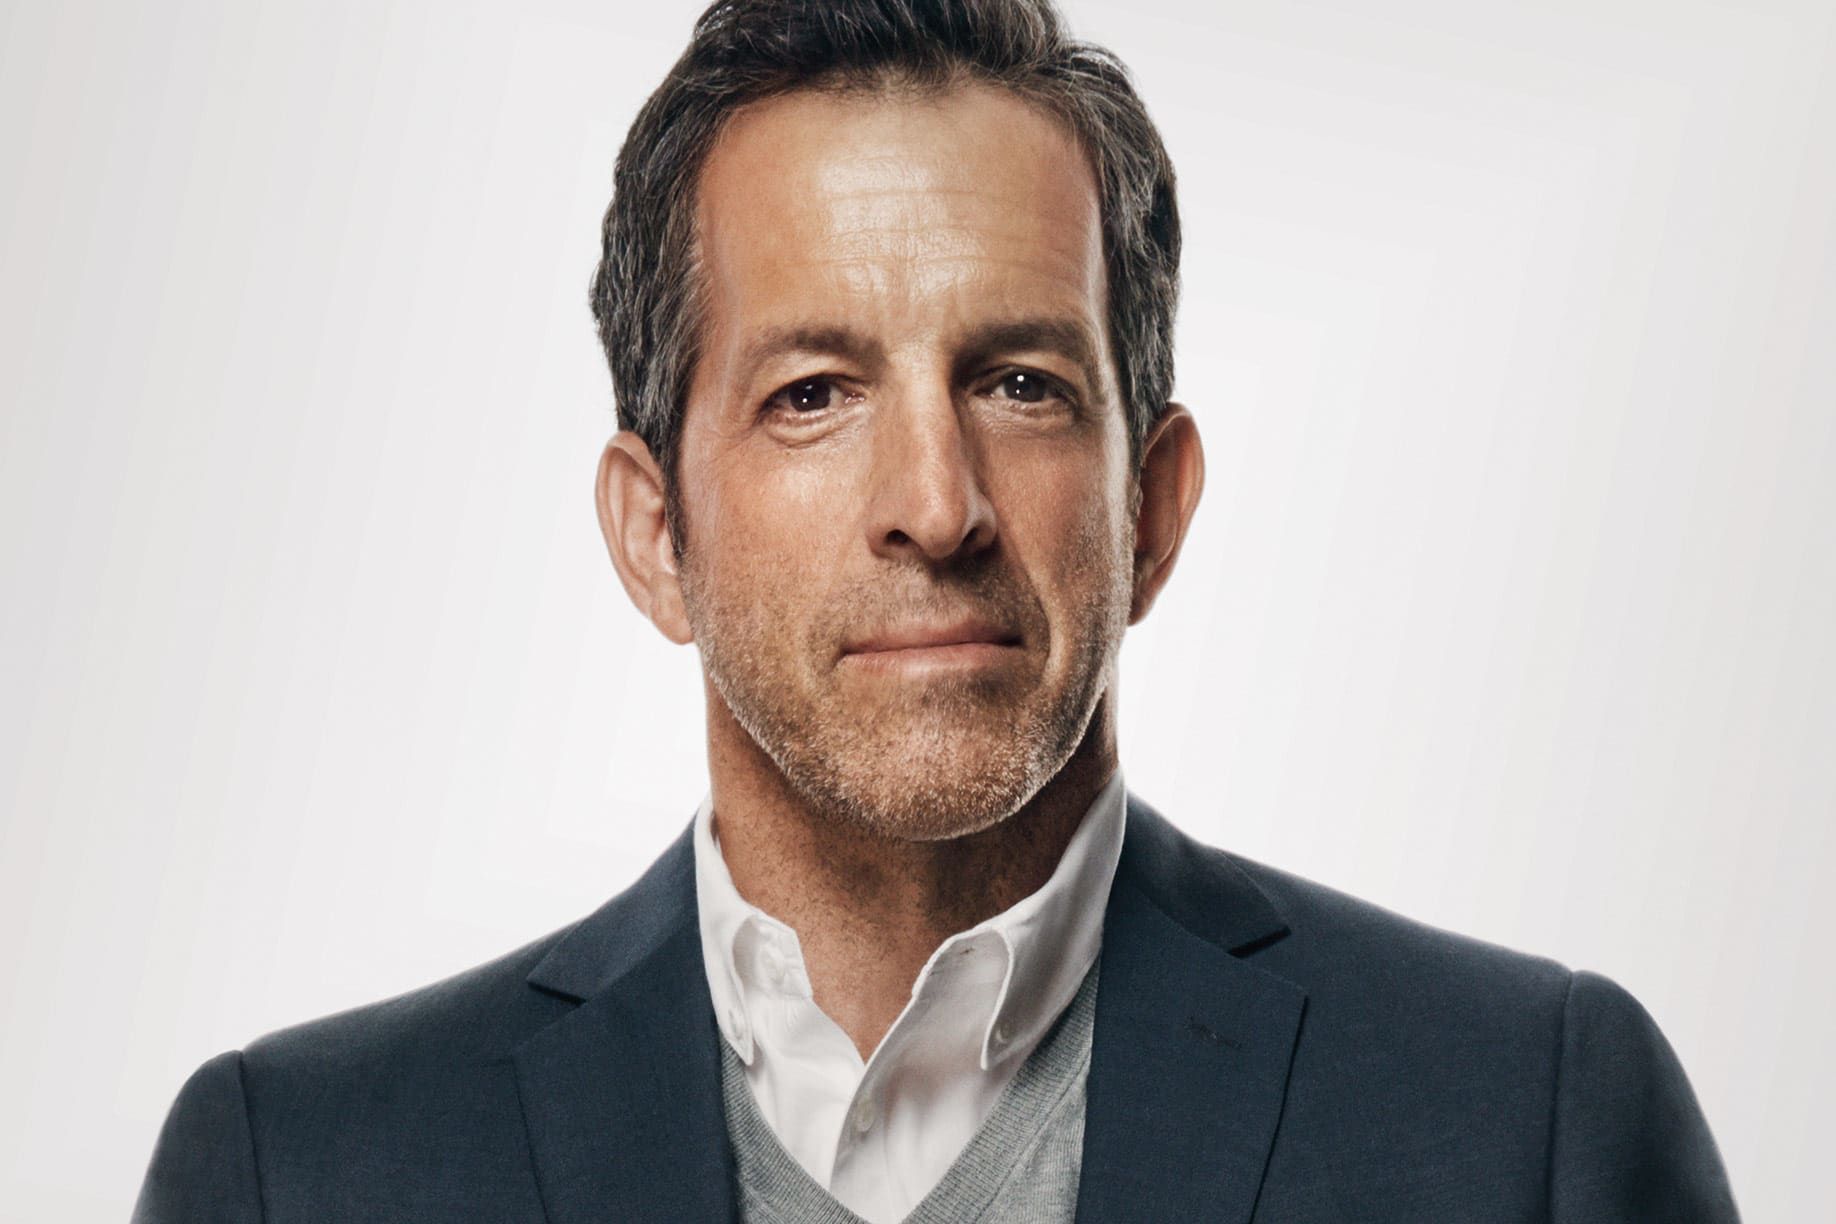 10 Intriguing Facts About Kenneth Cole - Facts.net